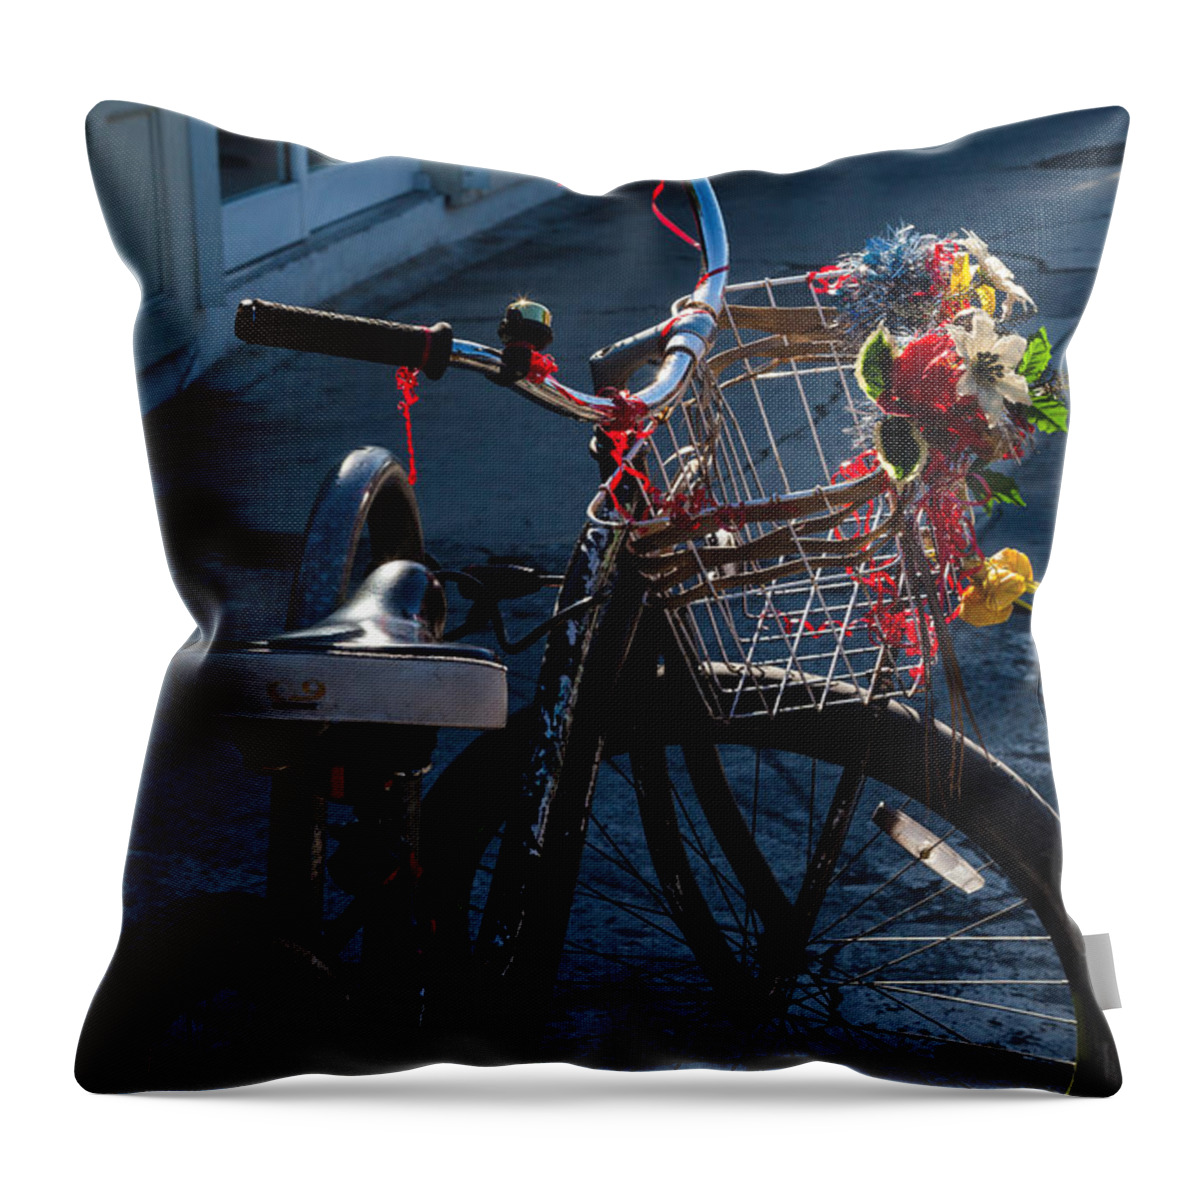 Basket Throw Pillow featuring the photograph Transportation Personality by Ed Gleichman